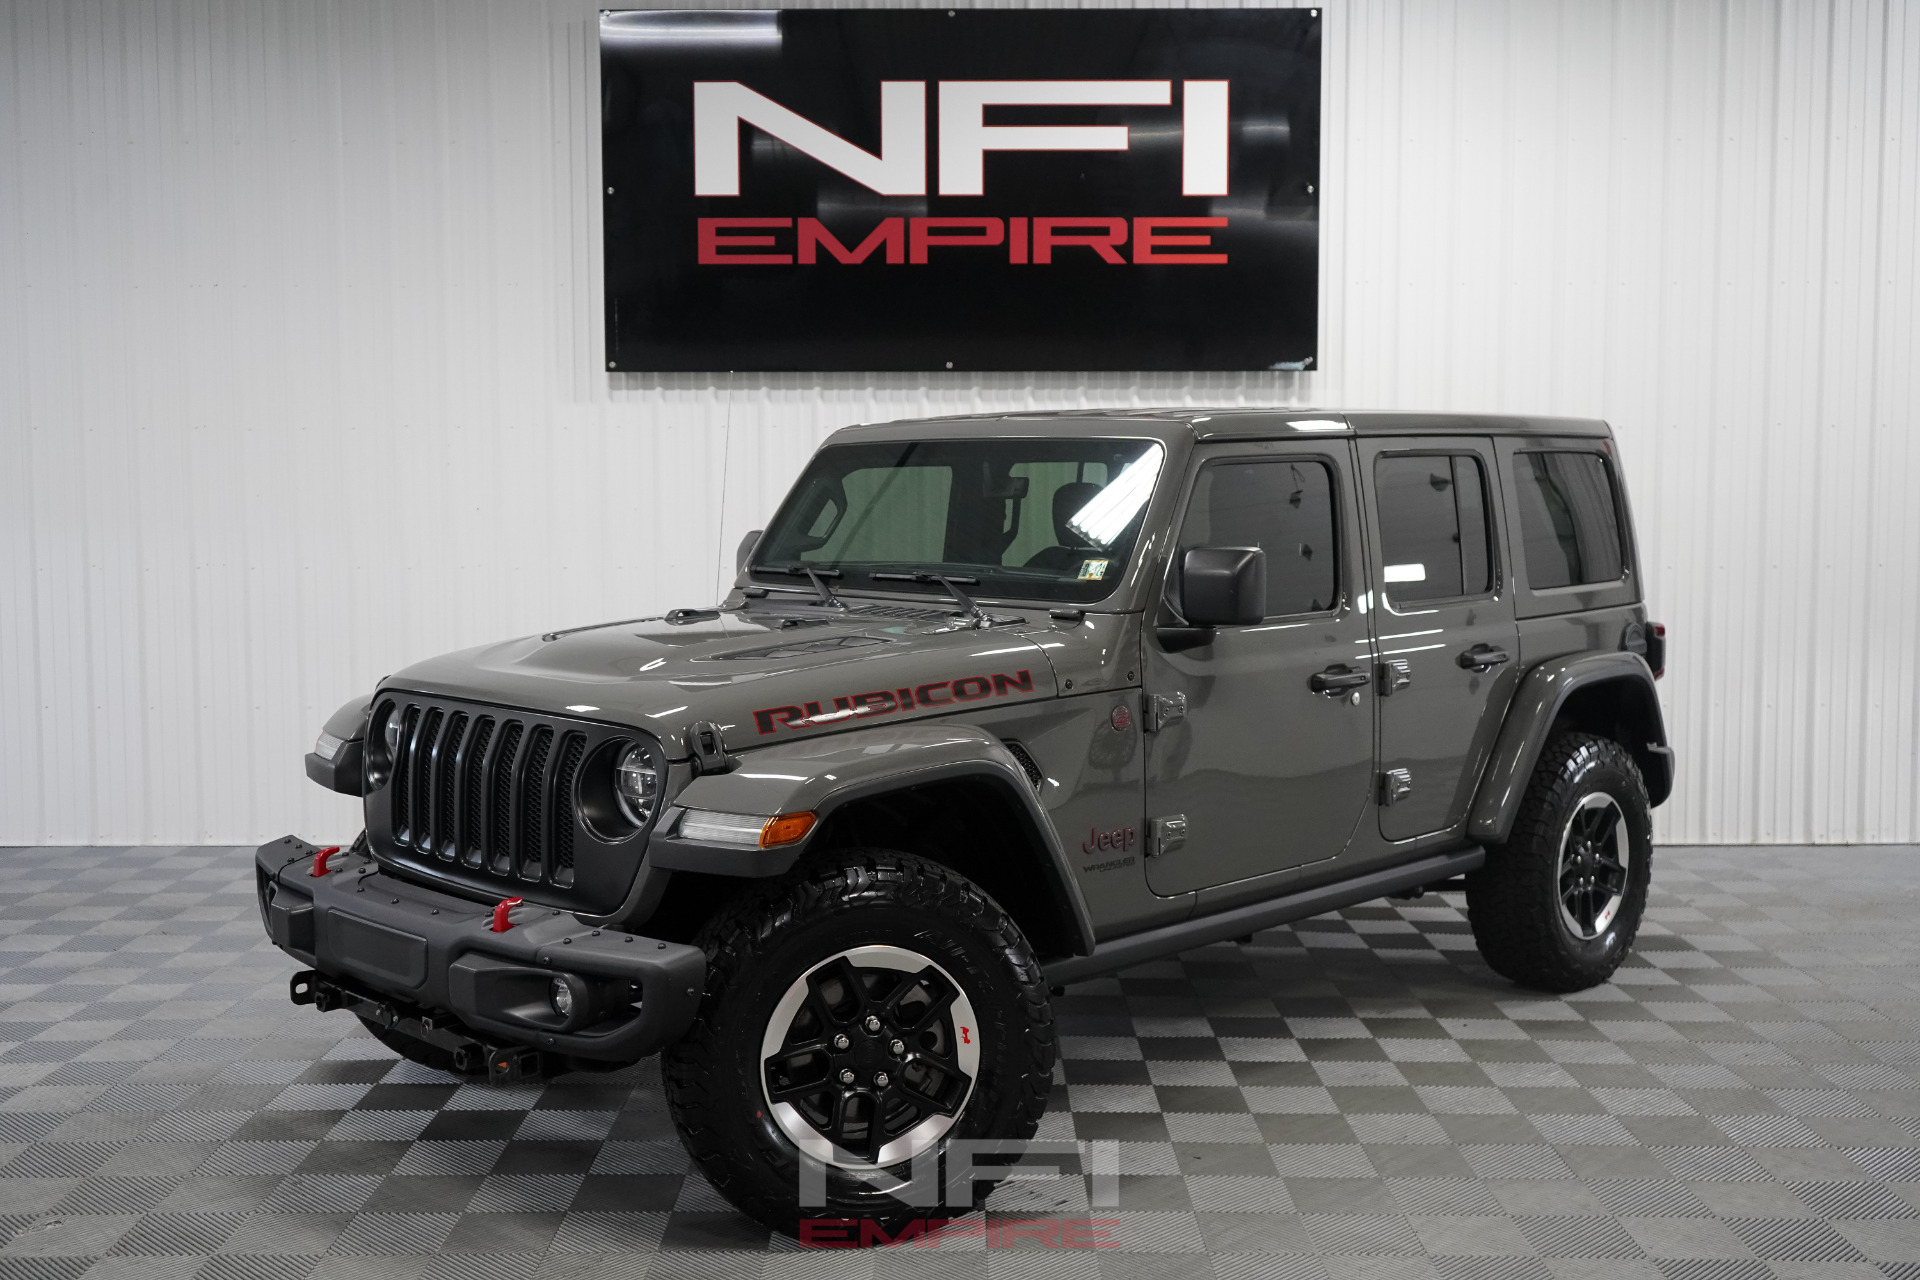 Used 2021 Jeep Wrangler Unlimited Rubicon Sport Utility 4d For Sale 43991 Nfi Empire Stock